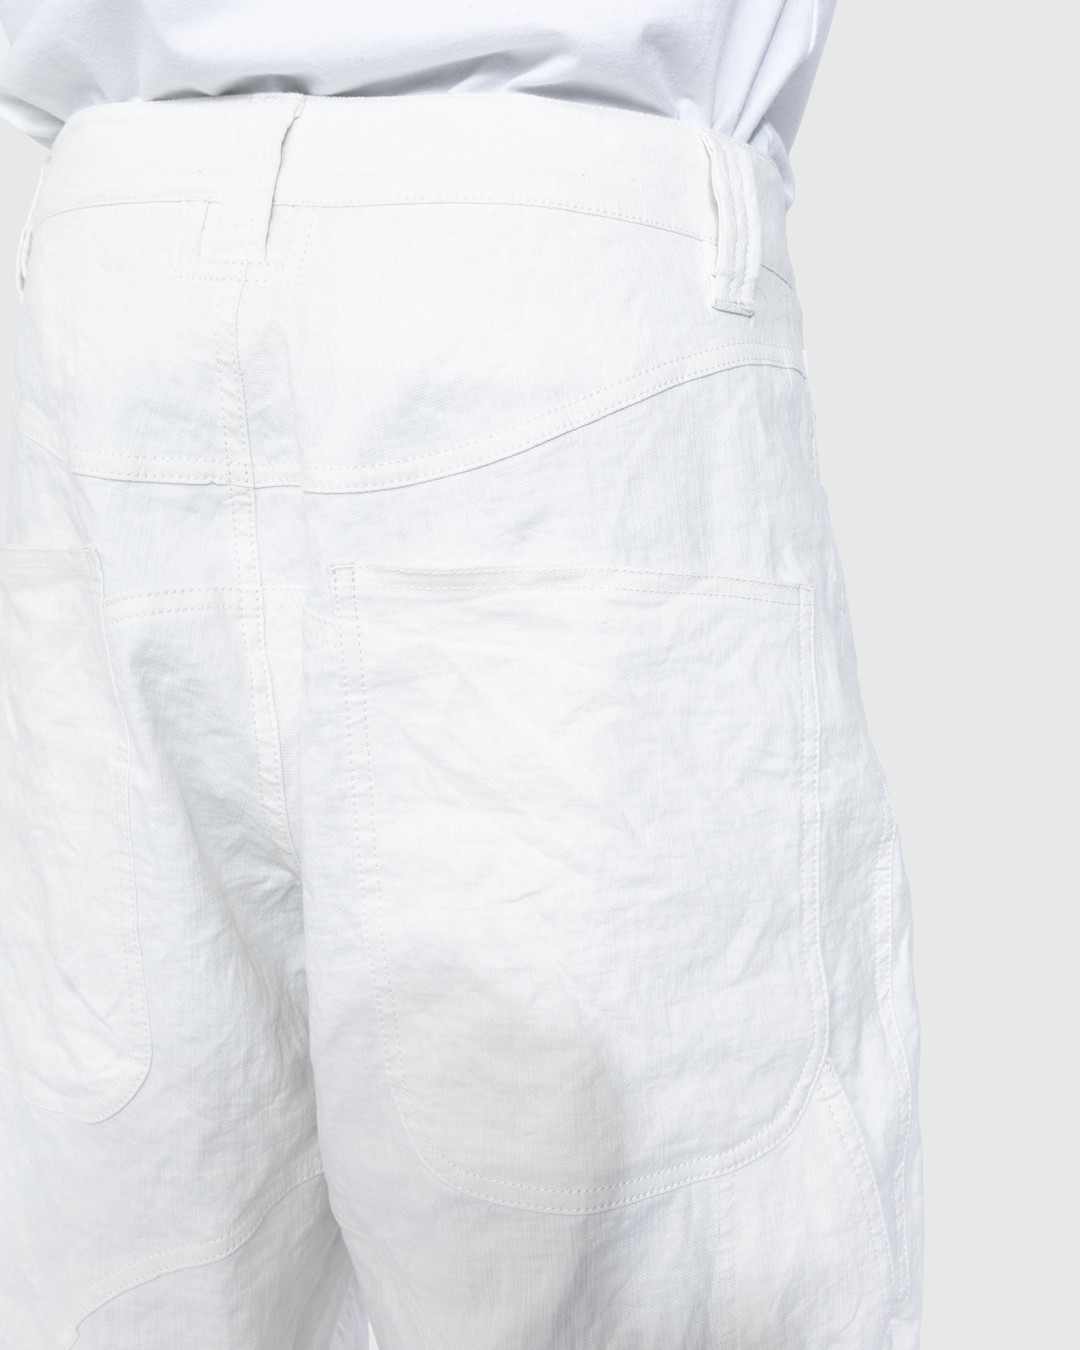 Trussardi – Wrinkled Cotton Trousers White - Pants - White - Image 5